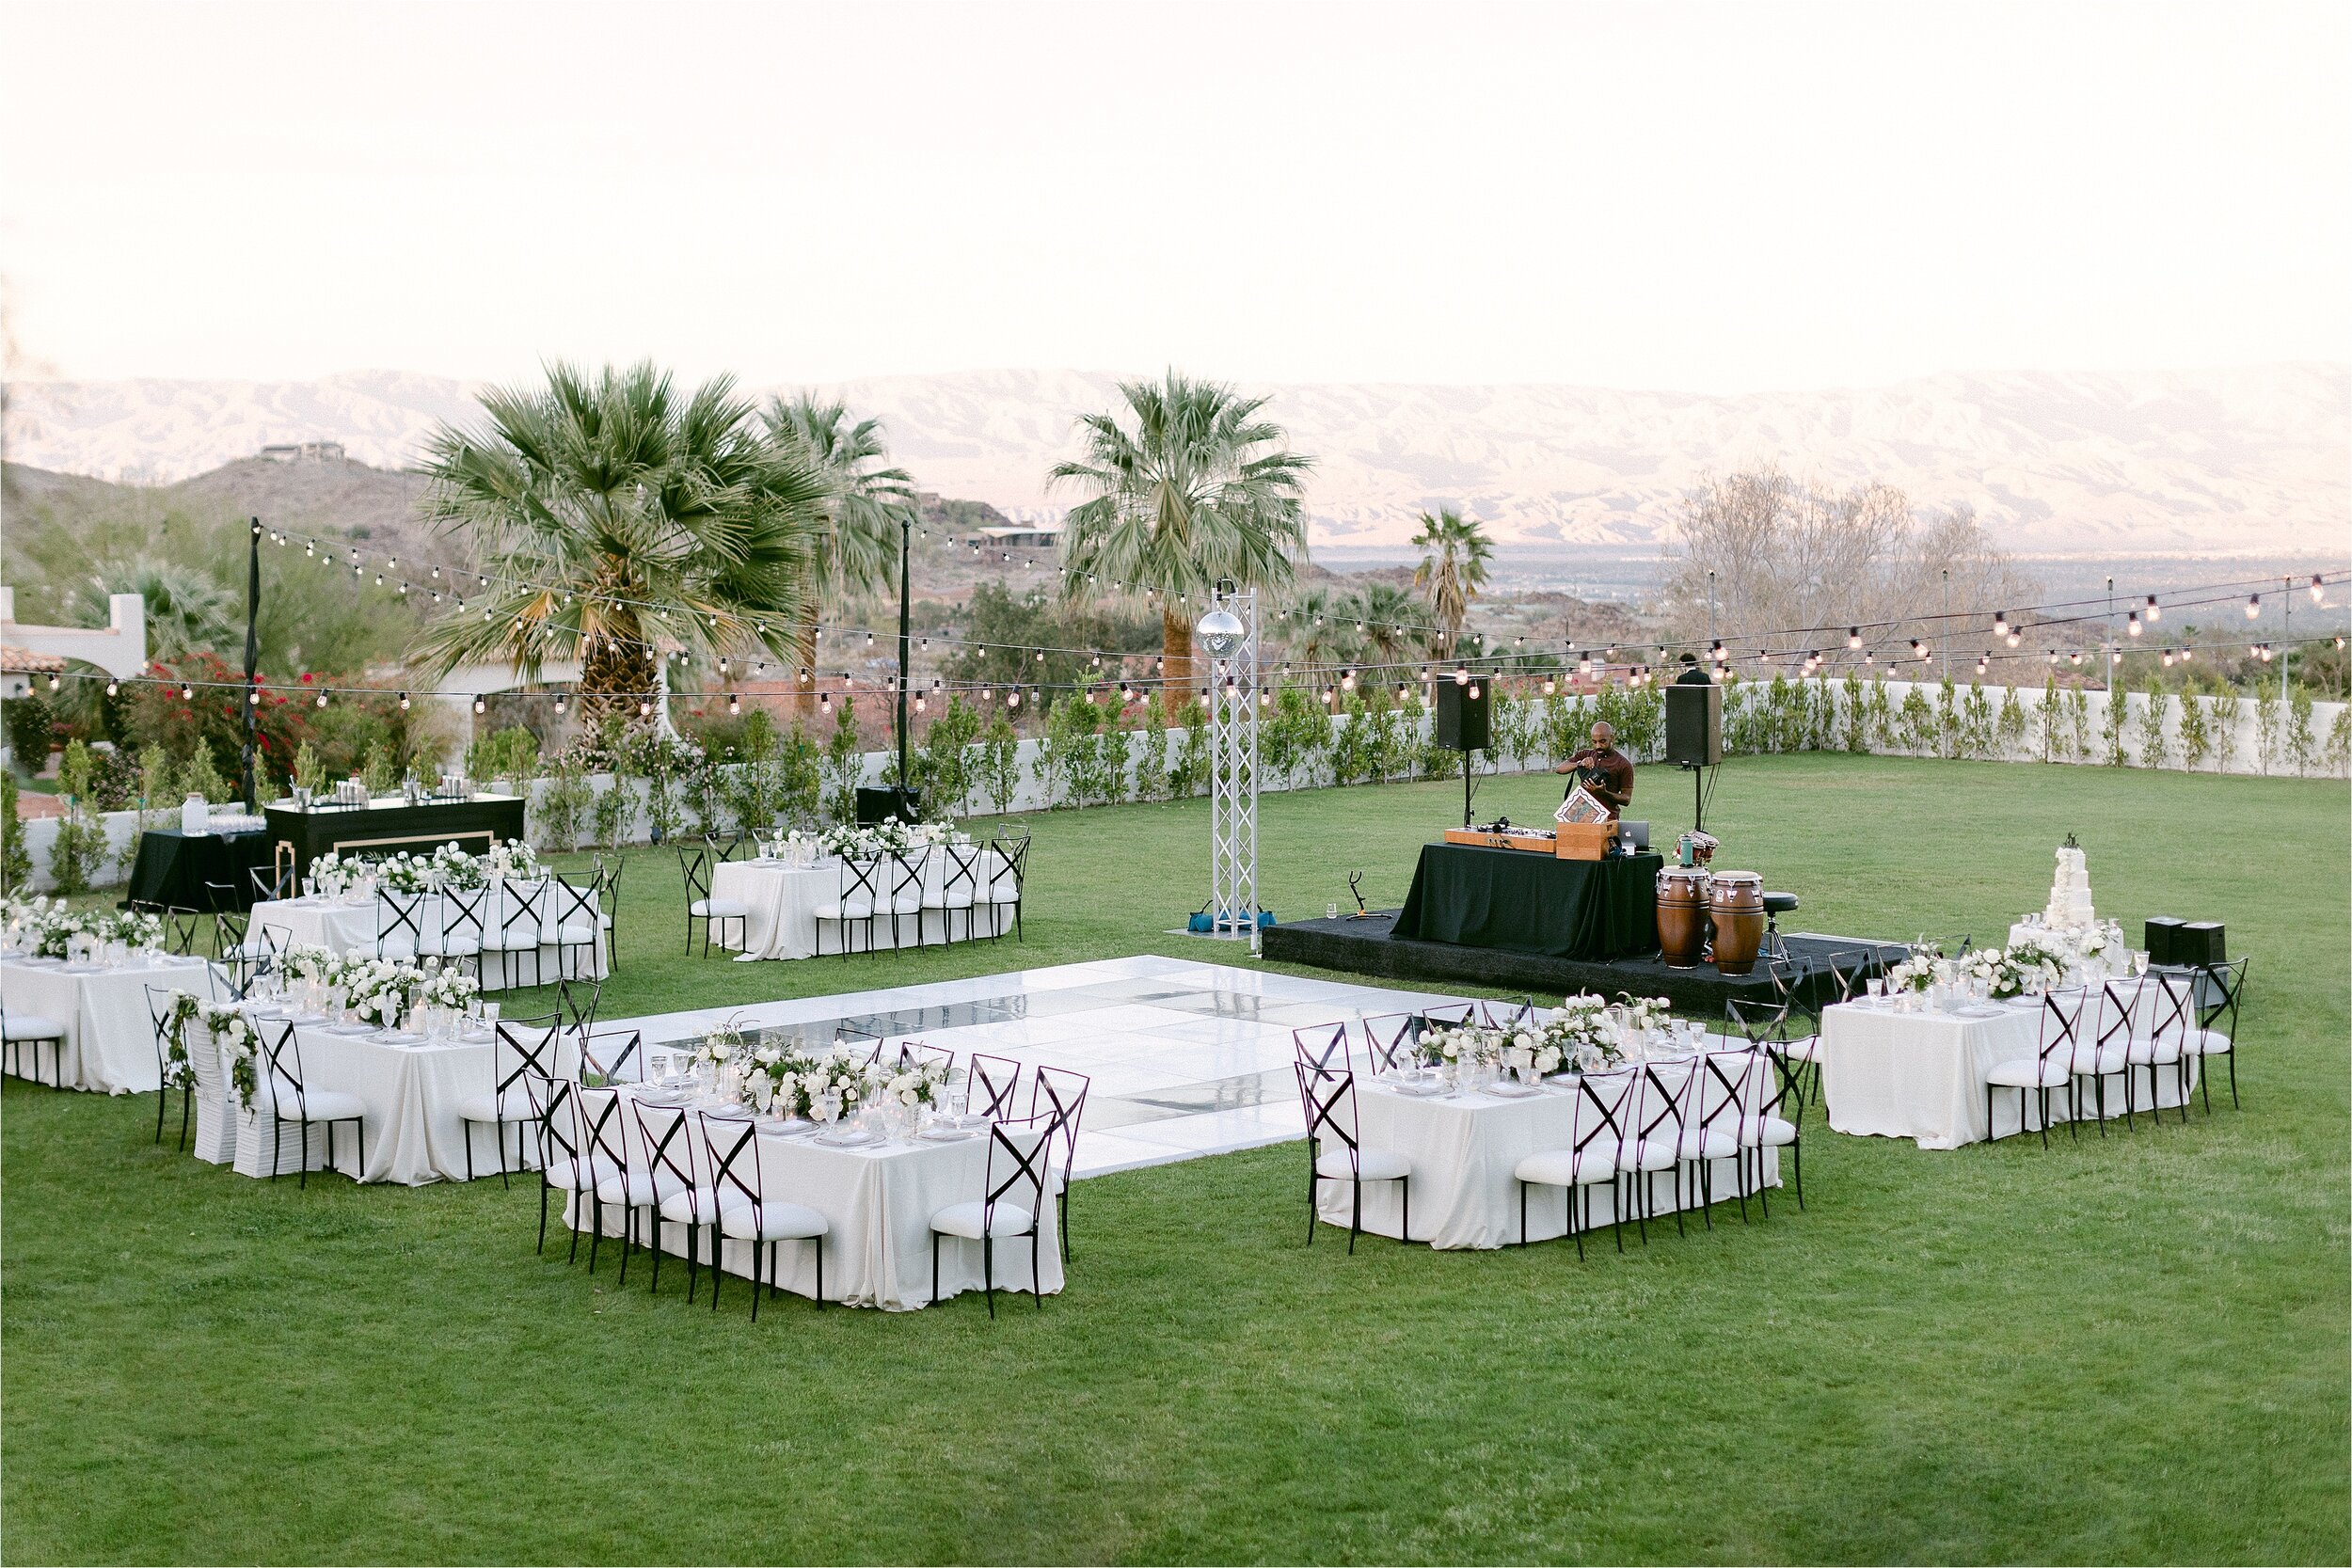 Elegant outdoor destination wedding reception at lush private estate in Palm Springs.  Featuring black and white dance floor, market lights, white linens, white floral centerpieces, and black metal chairs with white cushions. 